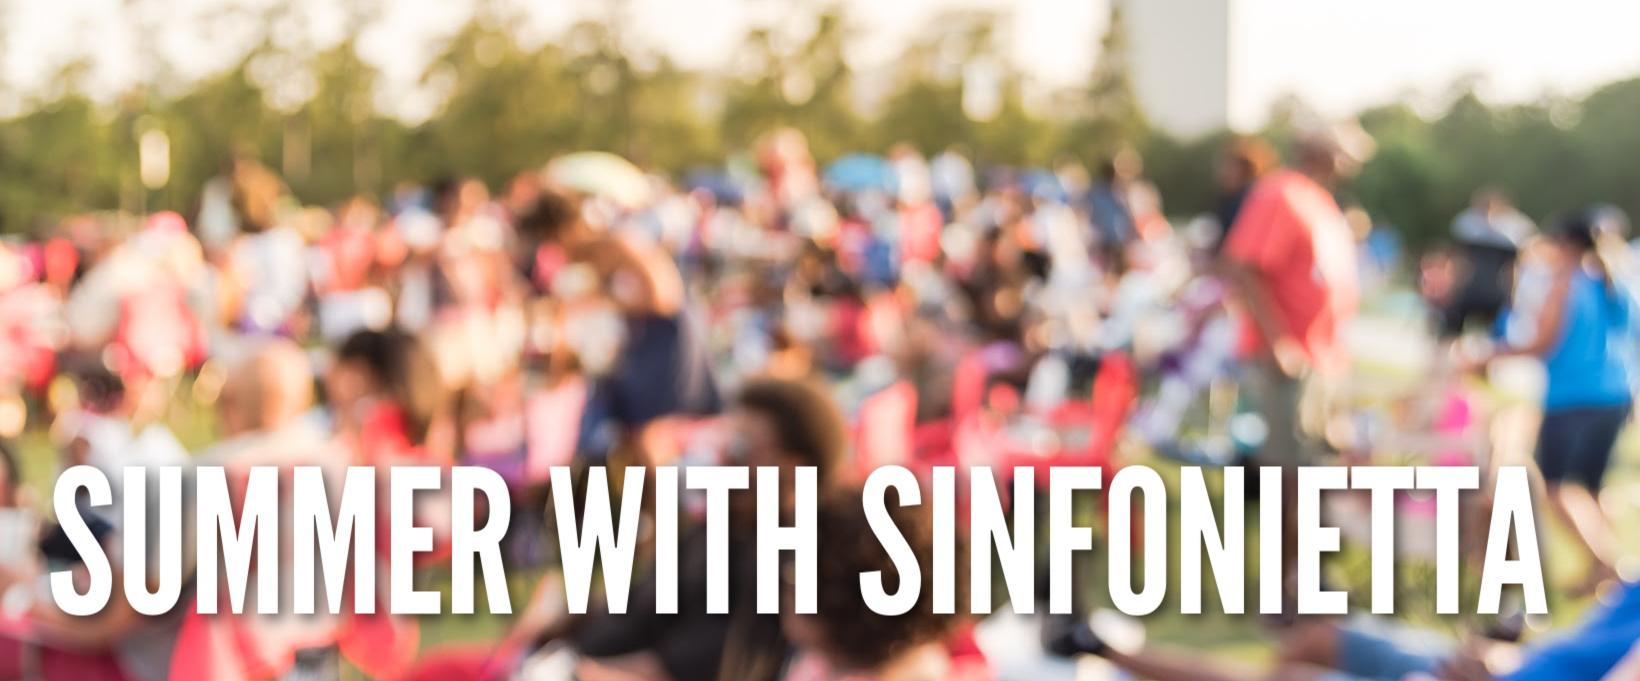 Blurry image of a crowd of people seated on a lawn during a festival with the words summer with sinfonietta in white overlayed on it